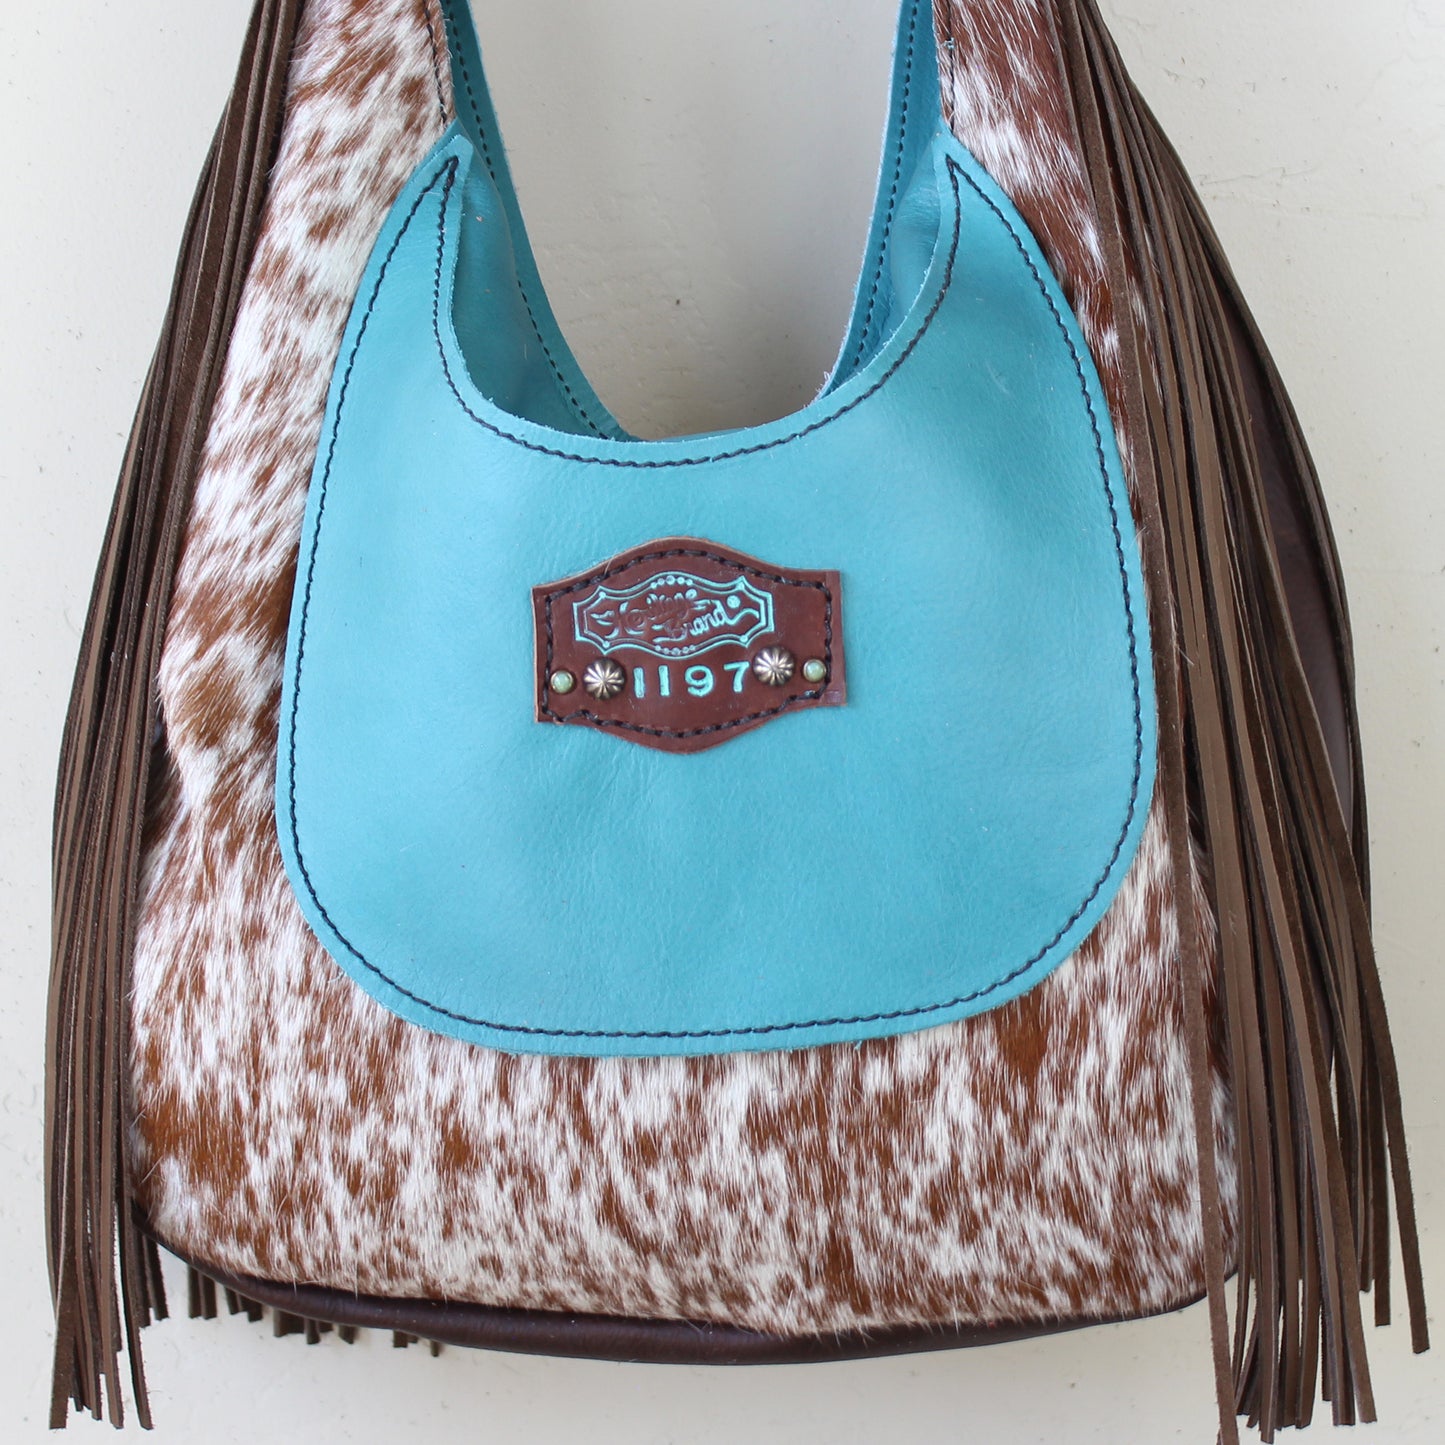 
                  
                    A blue and brown fringed shoulder bag with cowhide pattern and a metal emblem, the marilyn bag #1197 by Heritage Brand.
                  
                